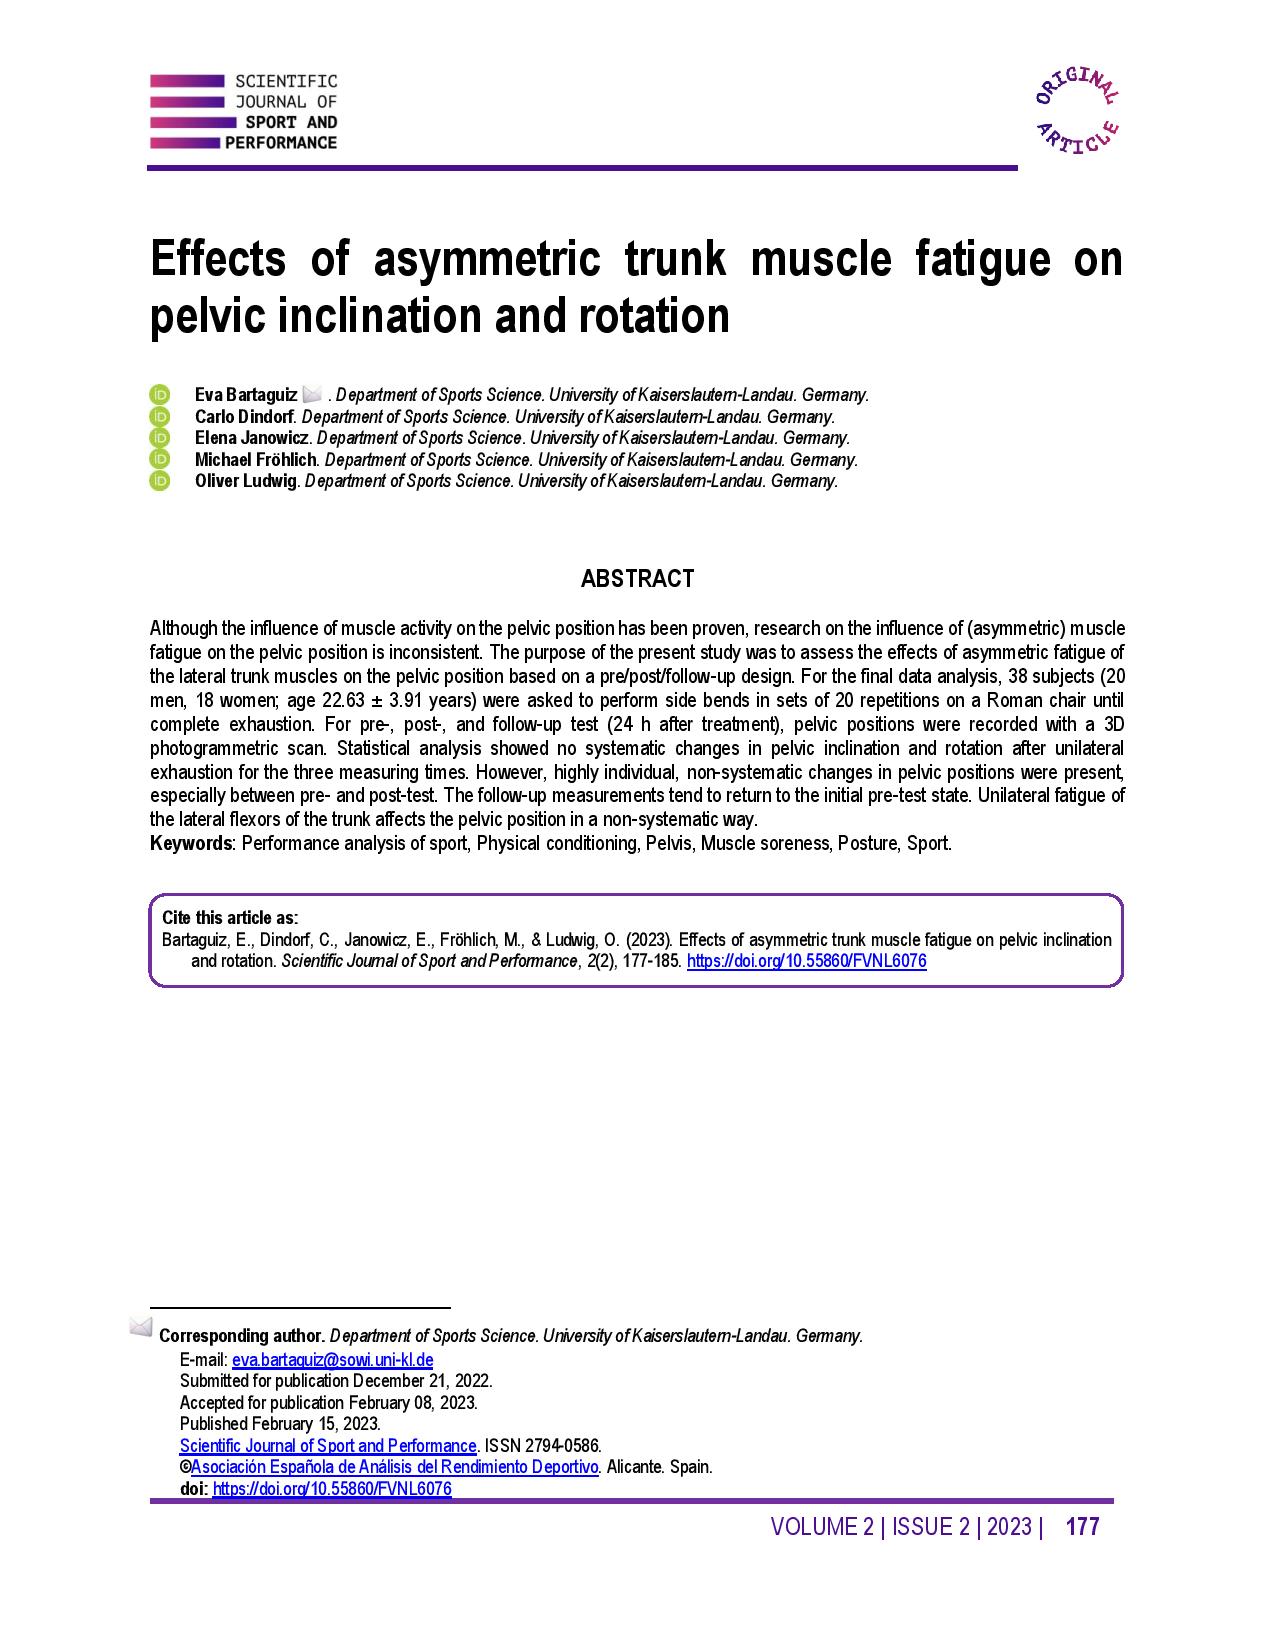 Effects of asymmetric trunk muscle fatigue on pelvic inclination and rotation